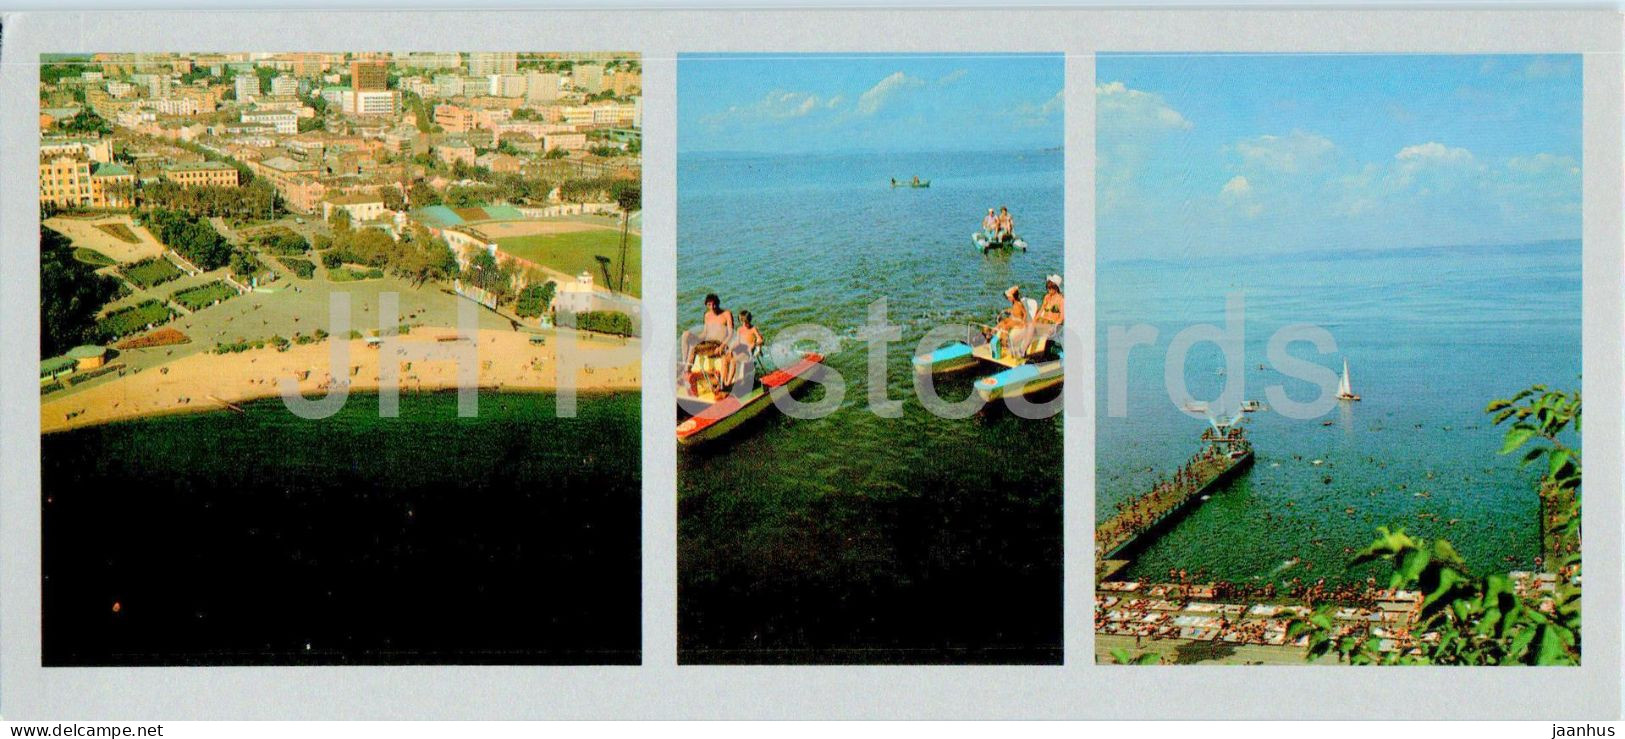 Bay Of The Peter The Great - Vladivostok - Amursky Bay - 1980 - Russia USSR - Unused - Russland